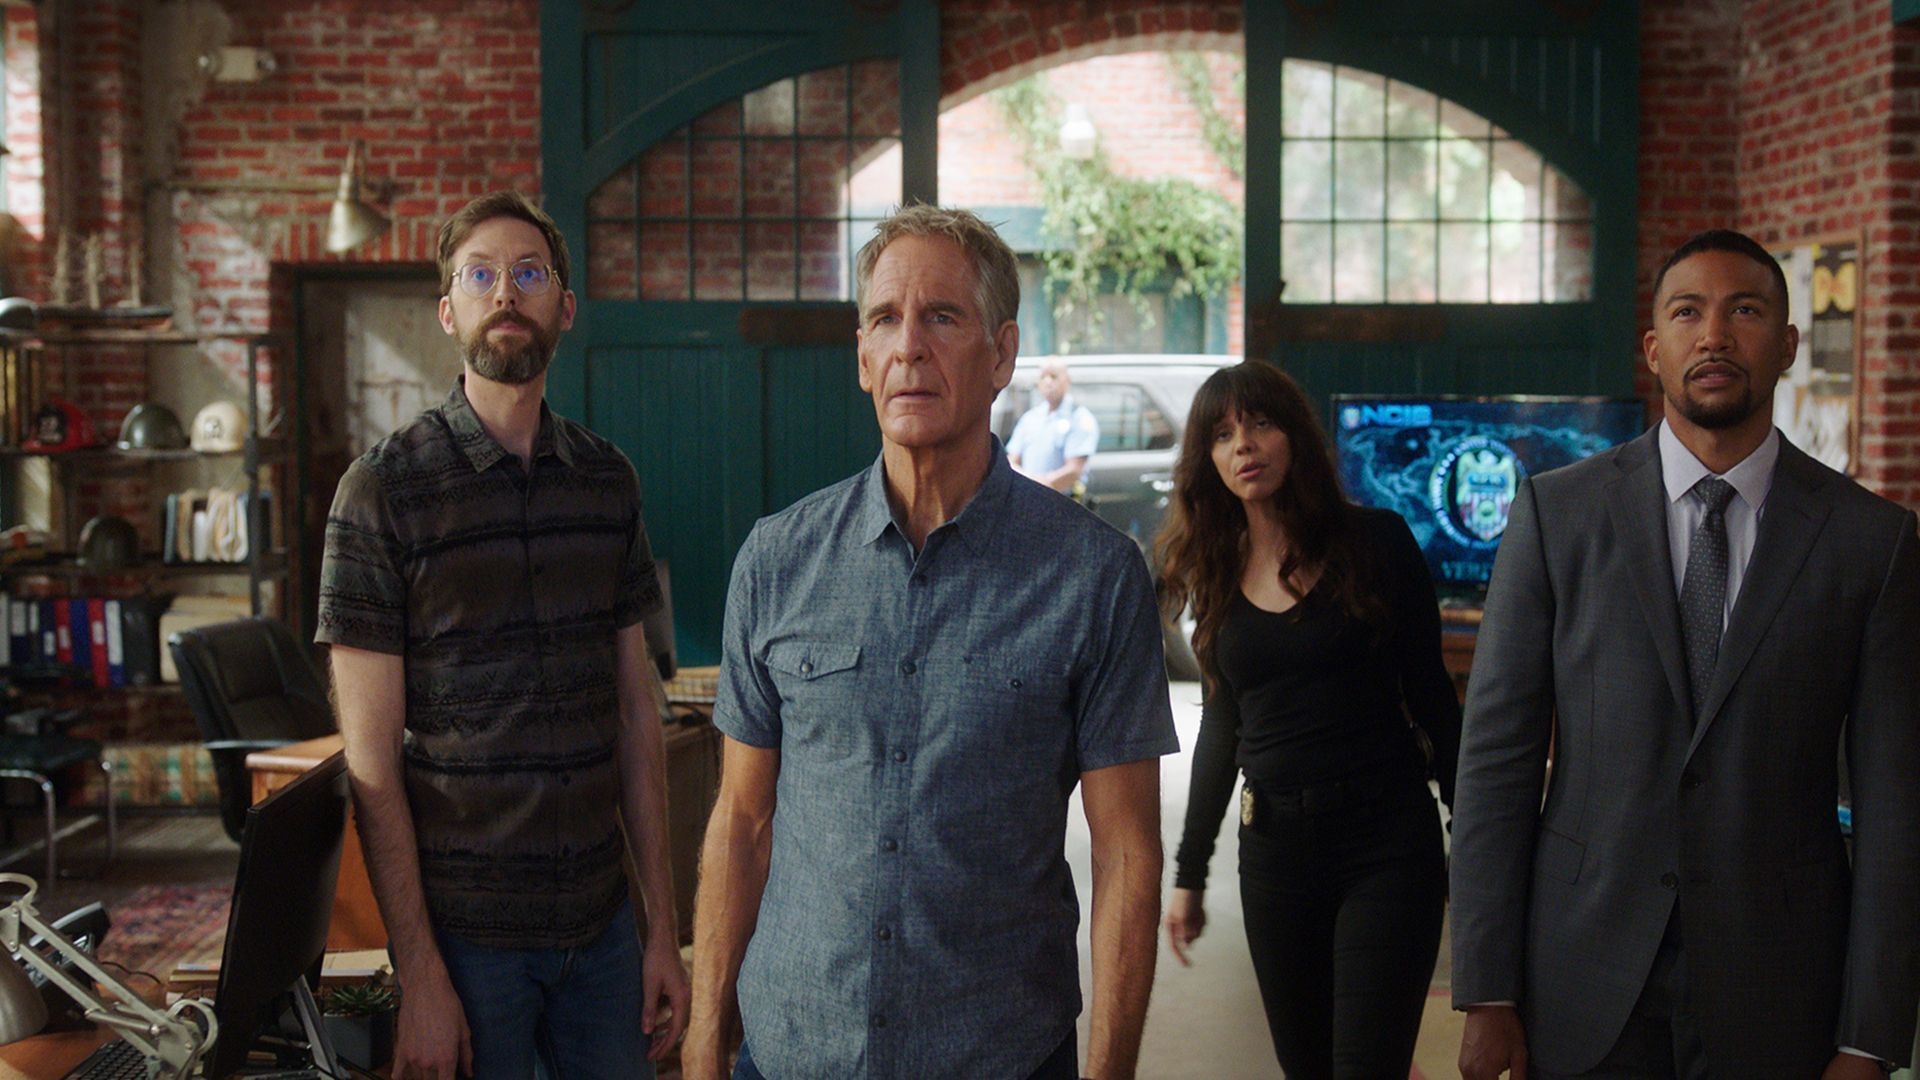 Scott Bakula: The 7th season of NCIS: New Orleans, Pride and the team fighting for justice. 1920x1080 Full HD Background.